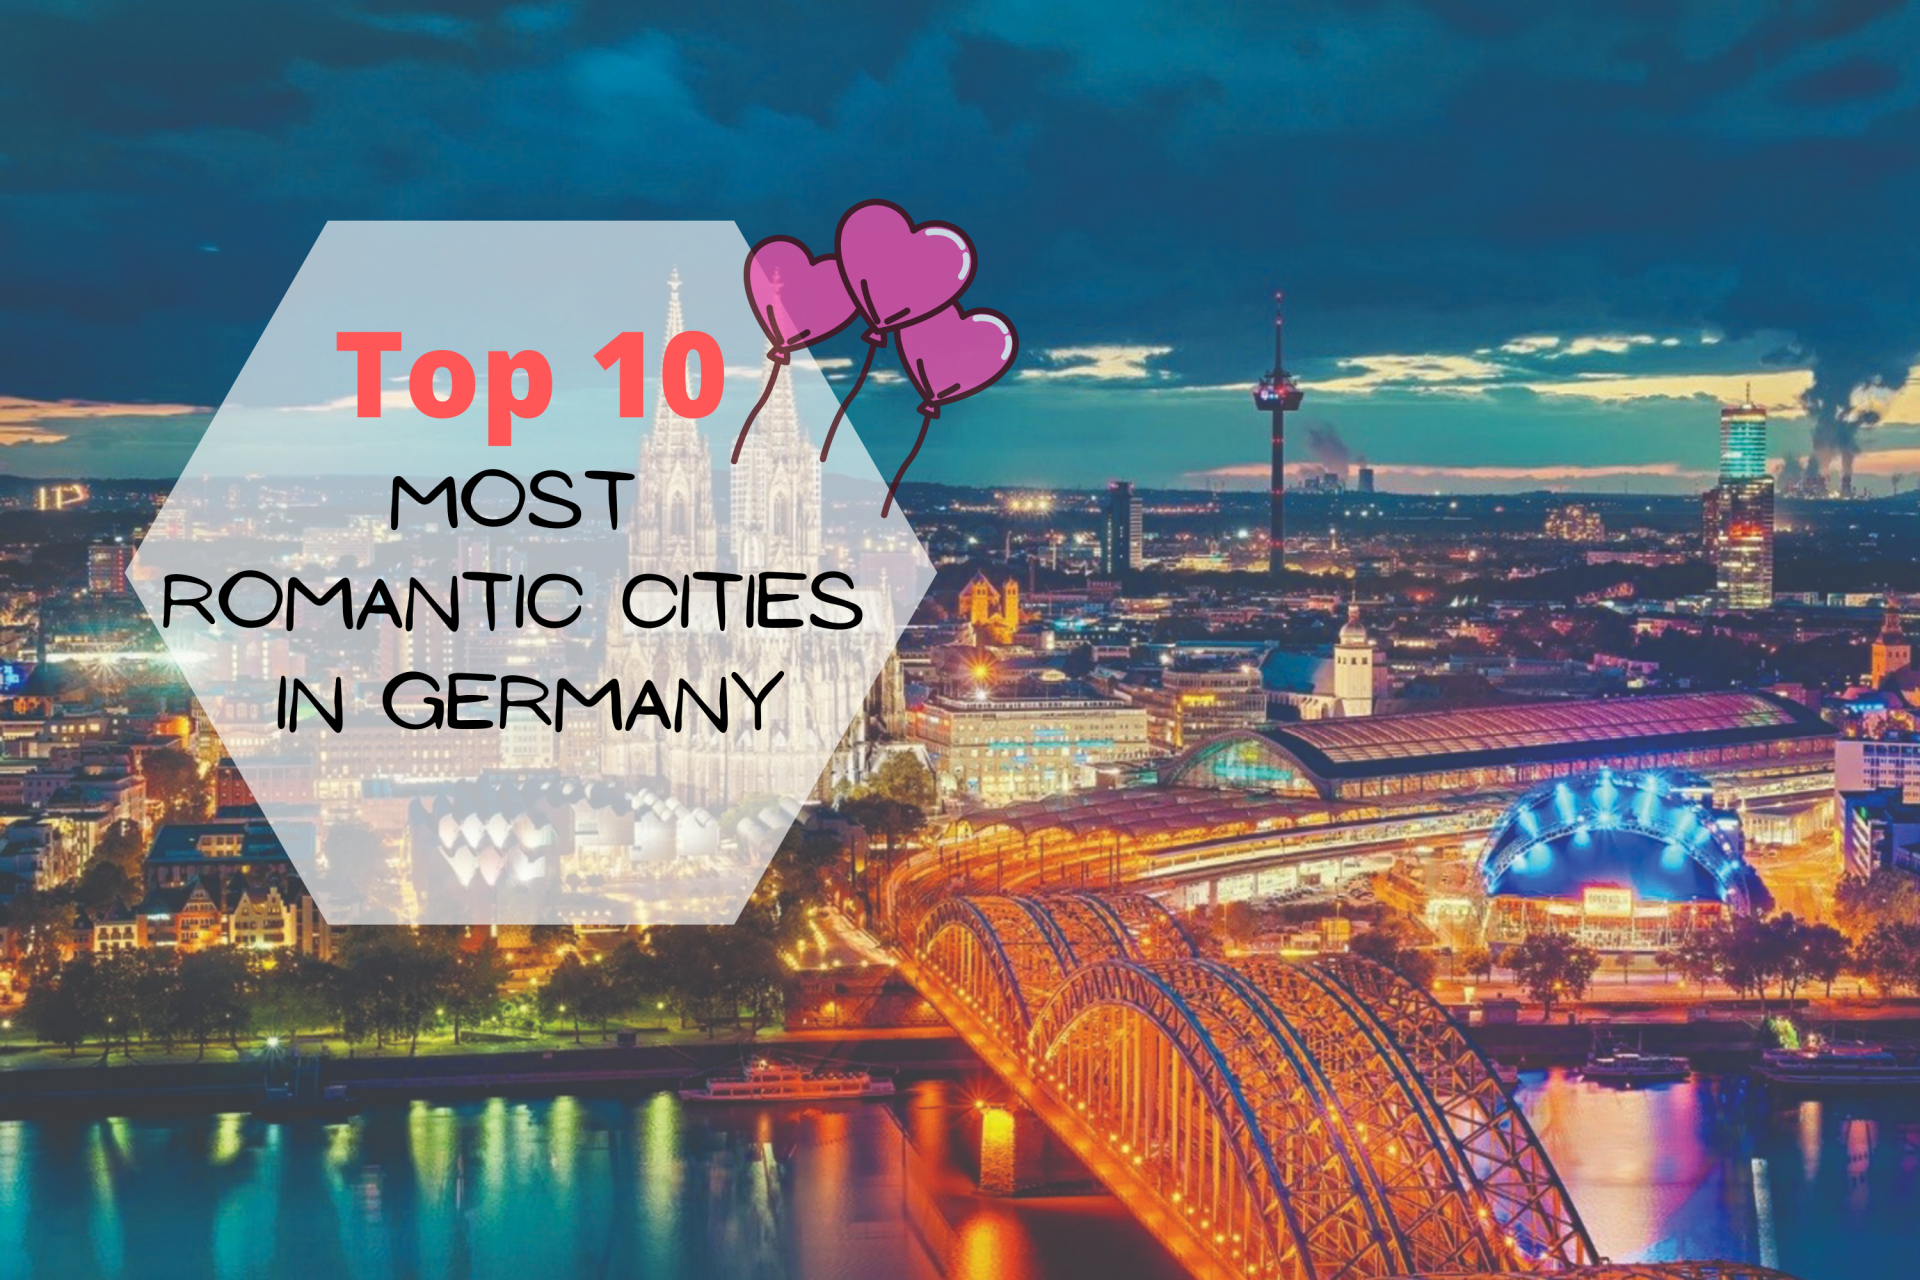 Top 10 Most Romantic Cities in Germany